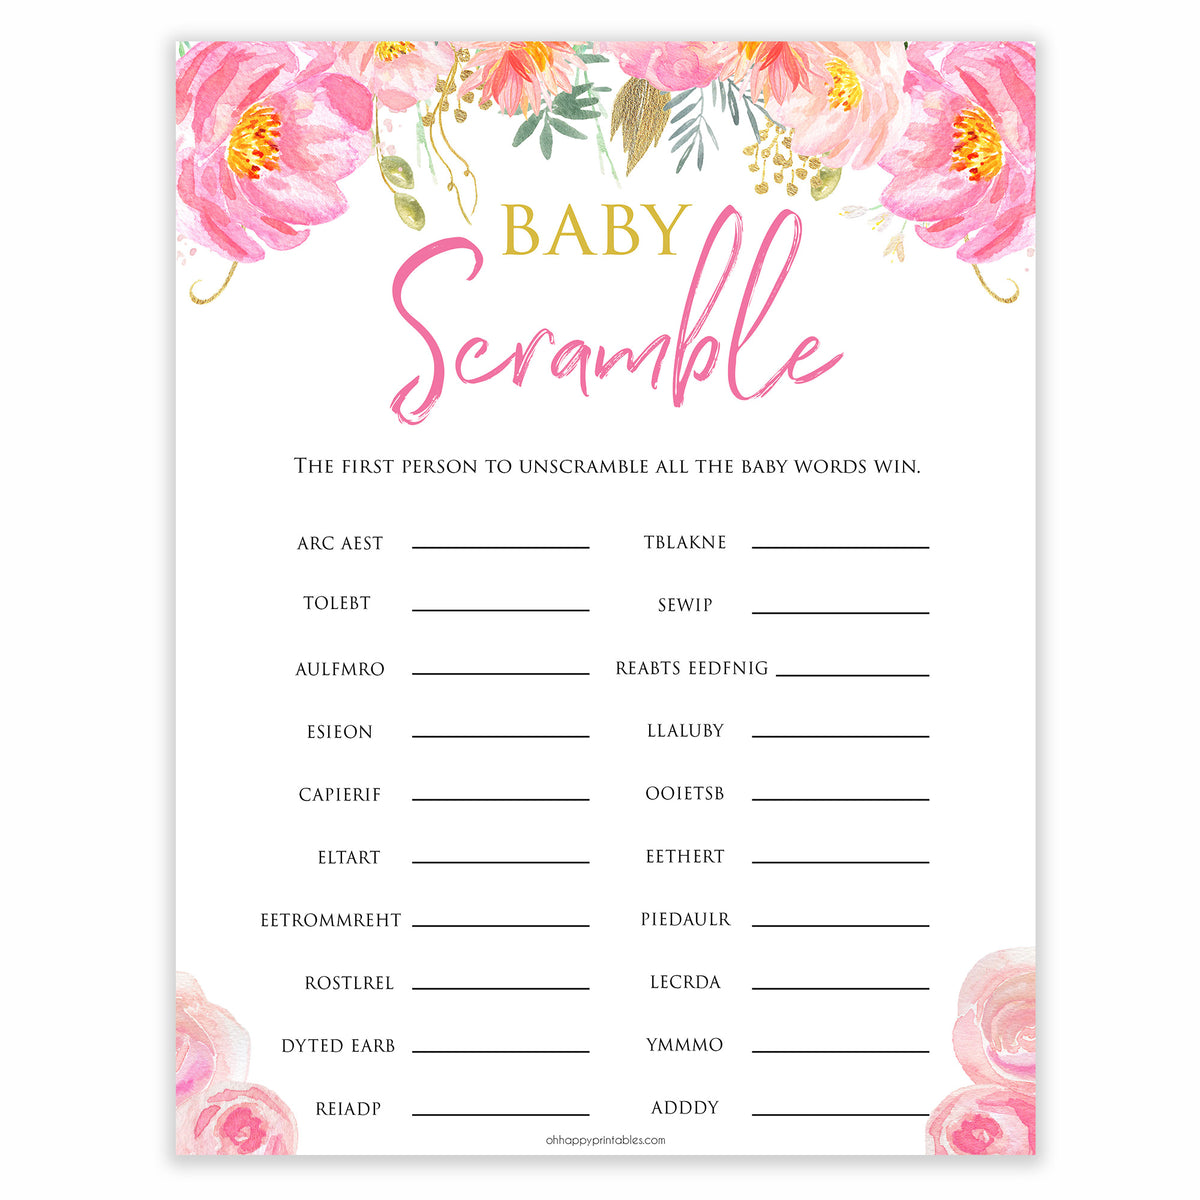 baby-shower-word-scramble-pink-blush-floral-baby-shower-games